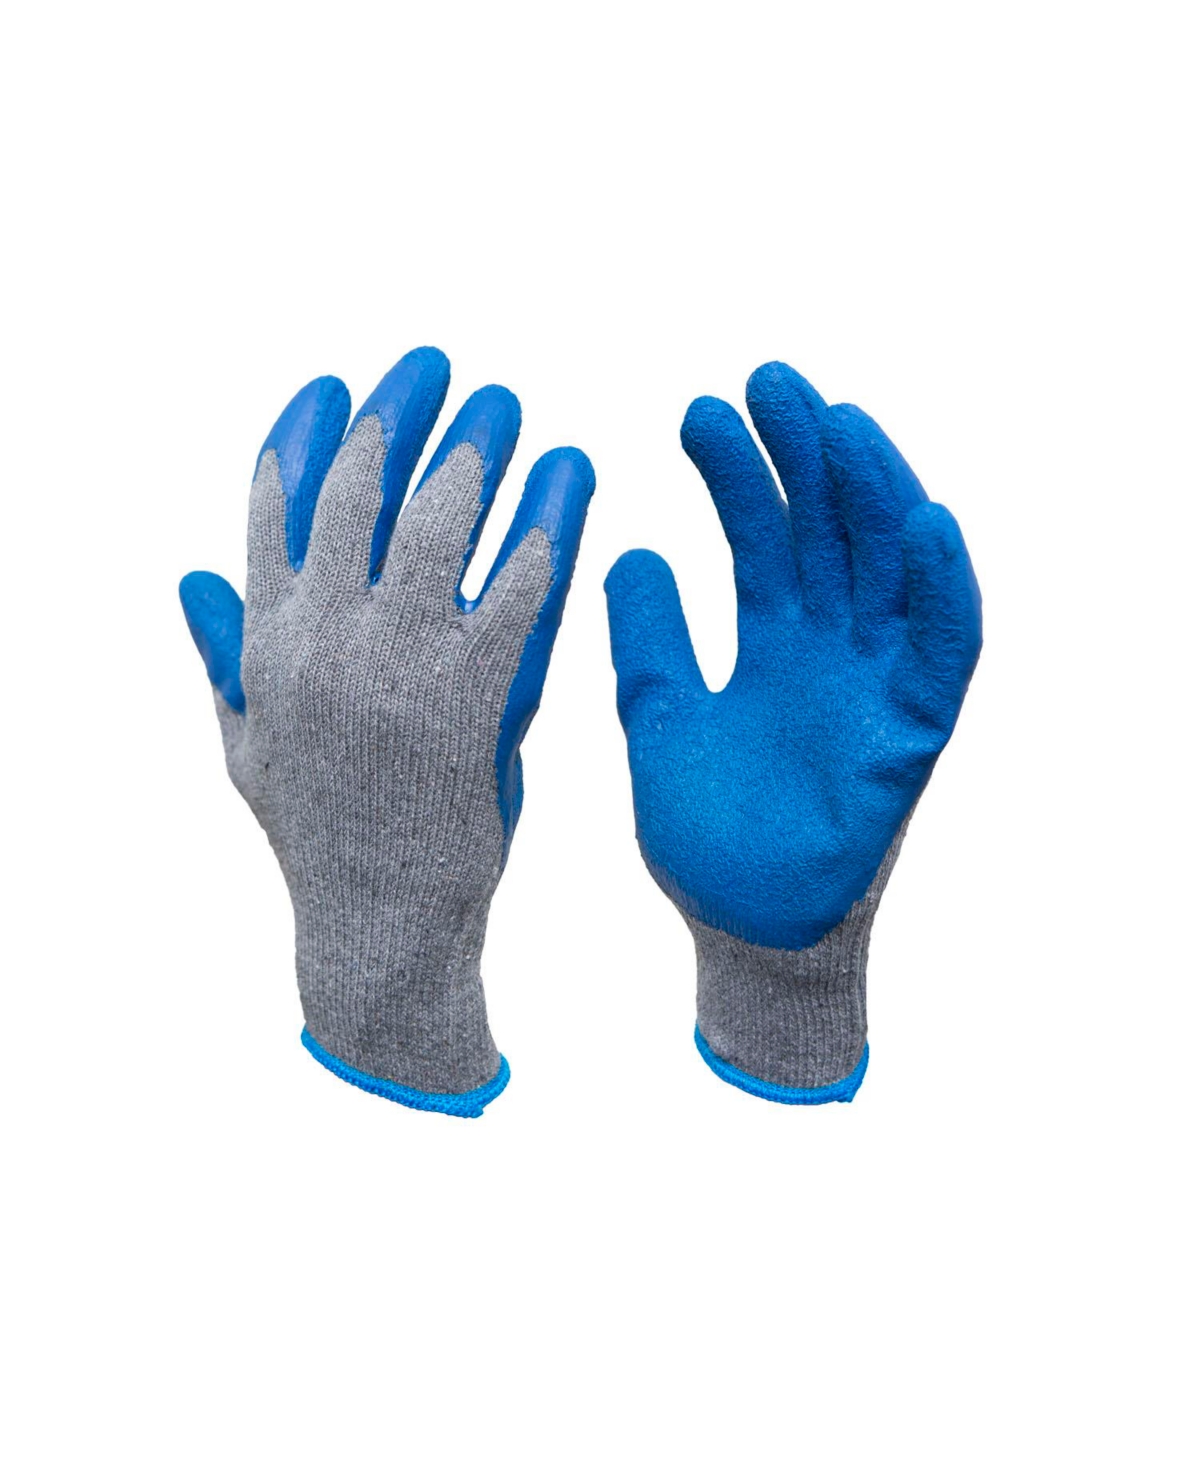 Rubber Latex Coated Work Gloves - Blue